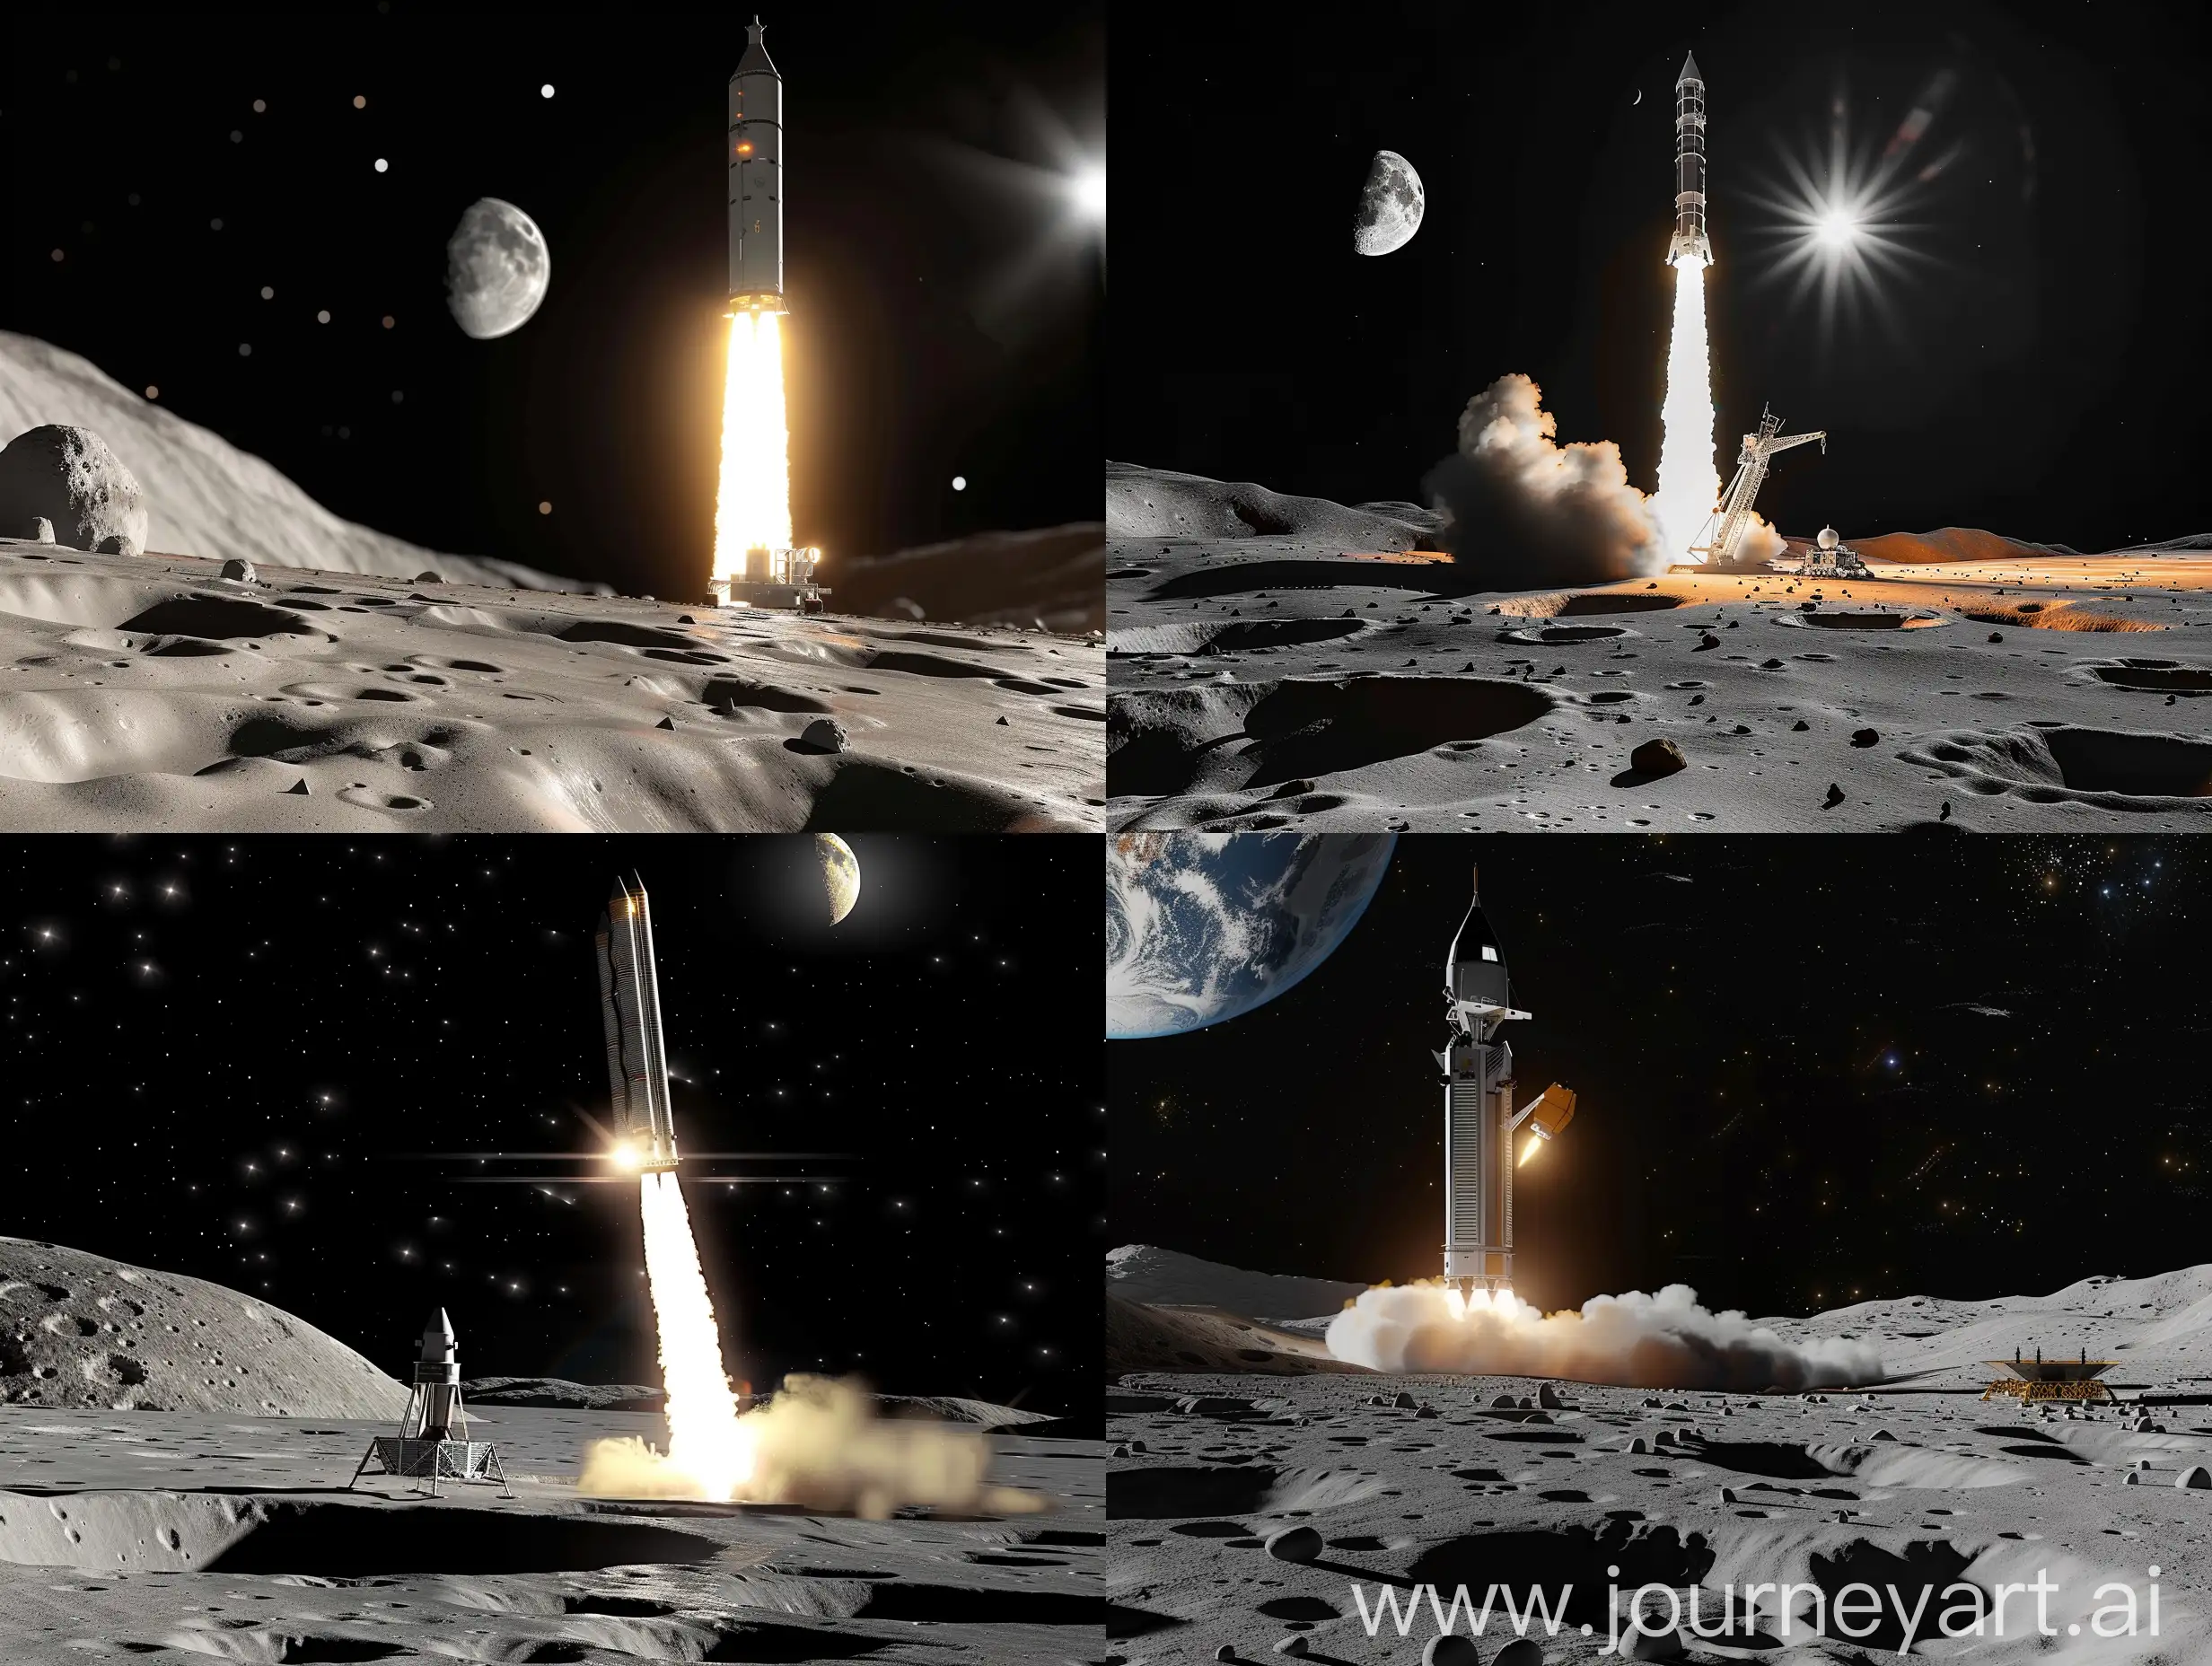 visualize the image showing GLSV MK-III Launch from earth to moon with vikram lander on moon